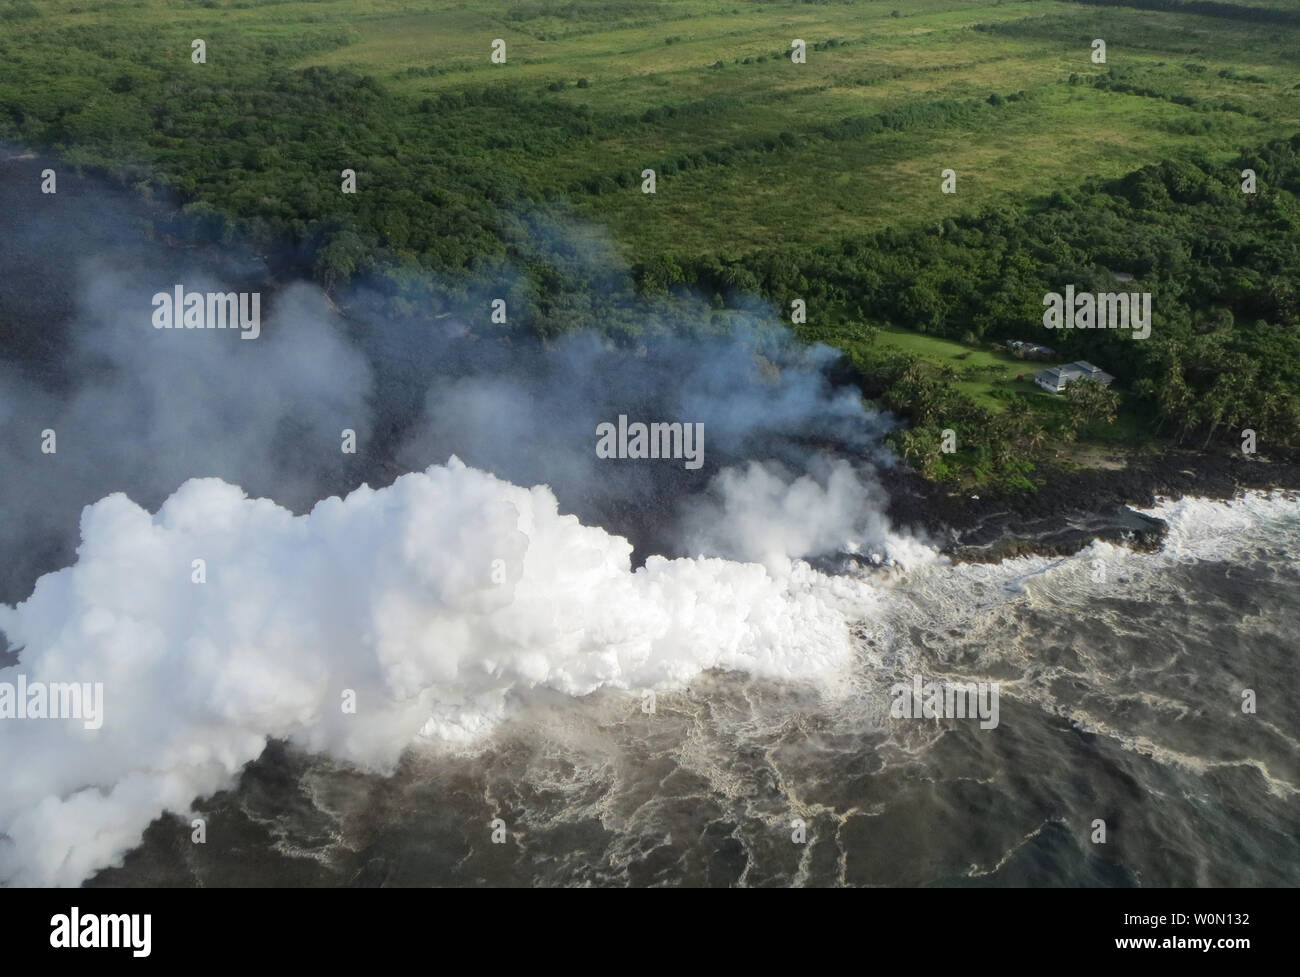 View taken on May 20, 2018, of the lava flow reaching the ocean. Hot lava entering the sea creates a dense white plume called 'laze' (short for 'lava haze'). Laze forms as hot lava boils seawater to dryness. The process leads to a series of chemical reactions that result in the formation of a billowing white cloud composed of a mixture of condensed seawater steam, hydrochloric acid gas, and tiny shards of volcanic glass. This mixture has the stinging and corrosive properties of dilute battery acid. Because laze can be blown downwind, its corrosive effects can extend far beyond the actual ocean Stock Photo